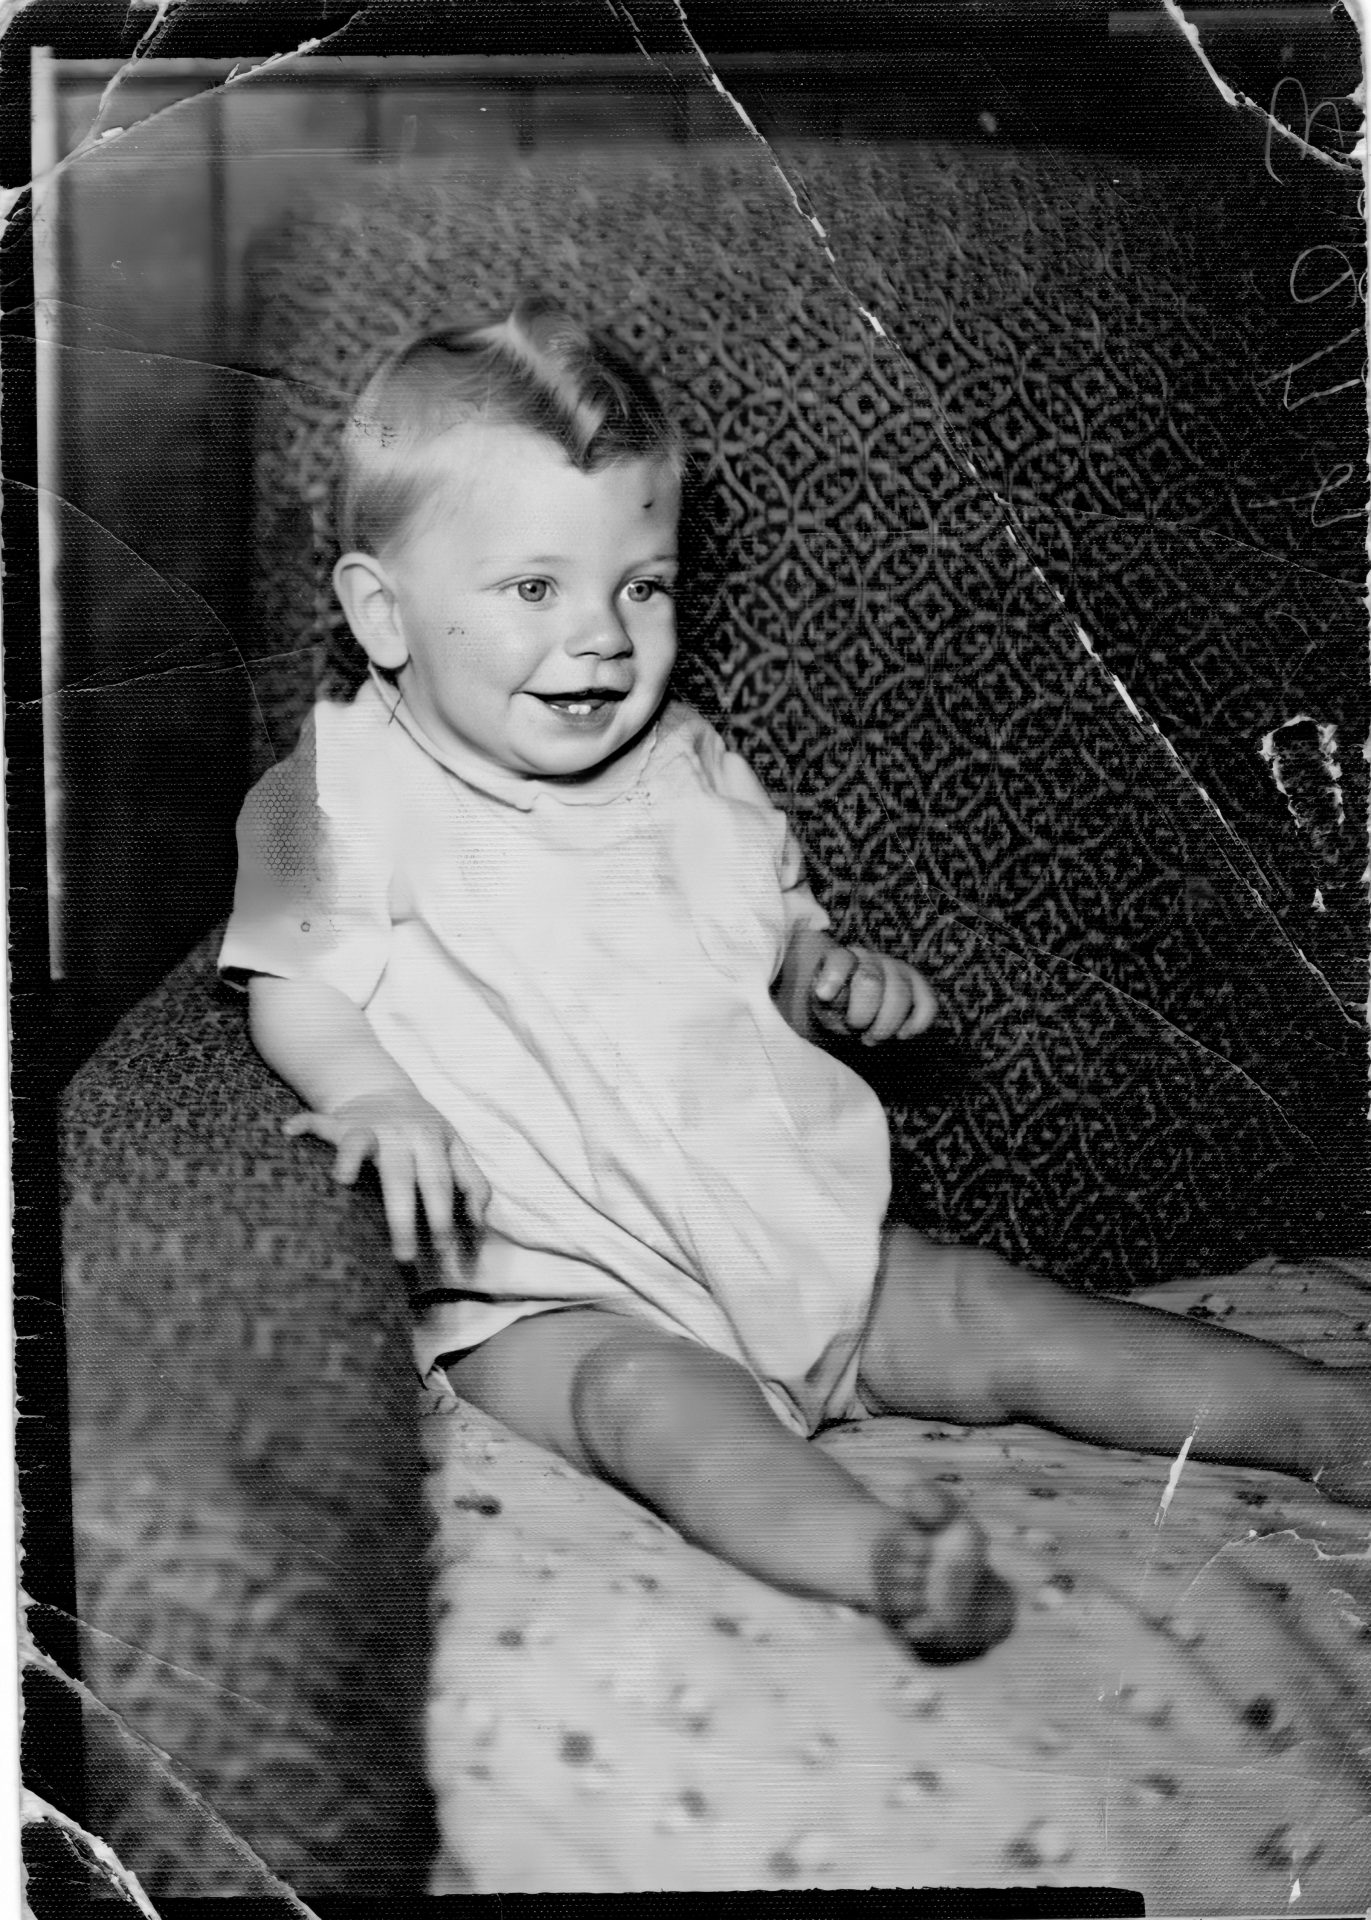 Russell as a Baby.